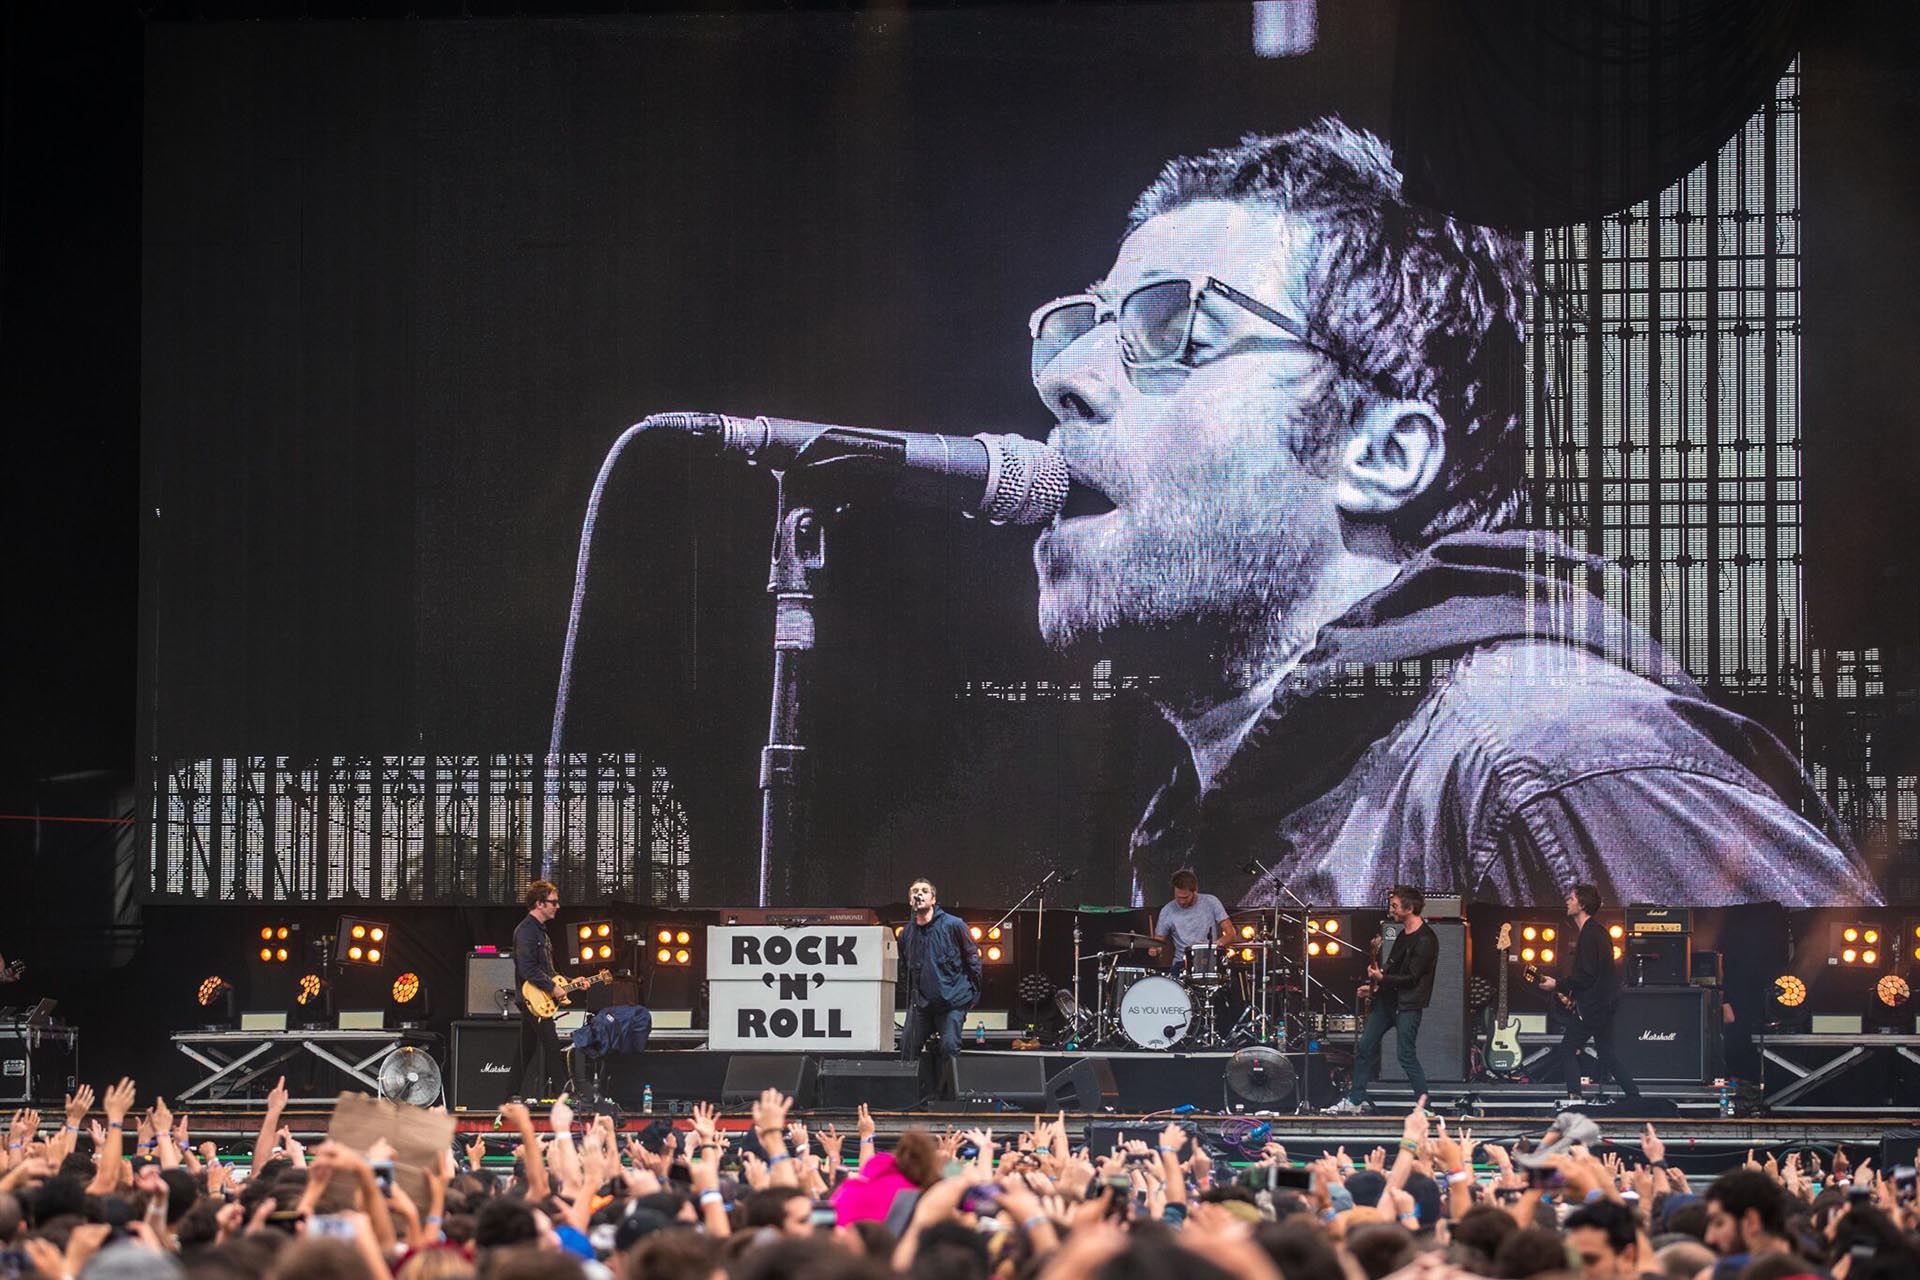 Liam Gallagher's show at Lollapalooza 2018 a year before he was diagnosed with arthritis. 